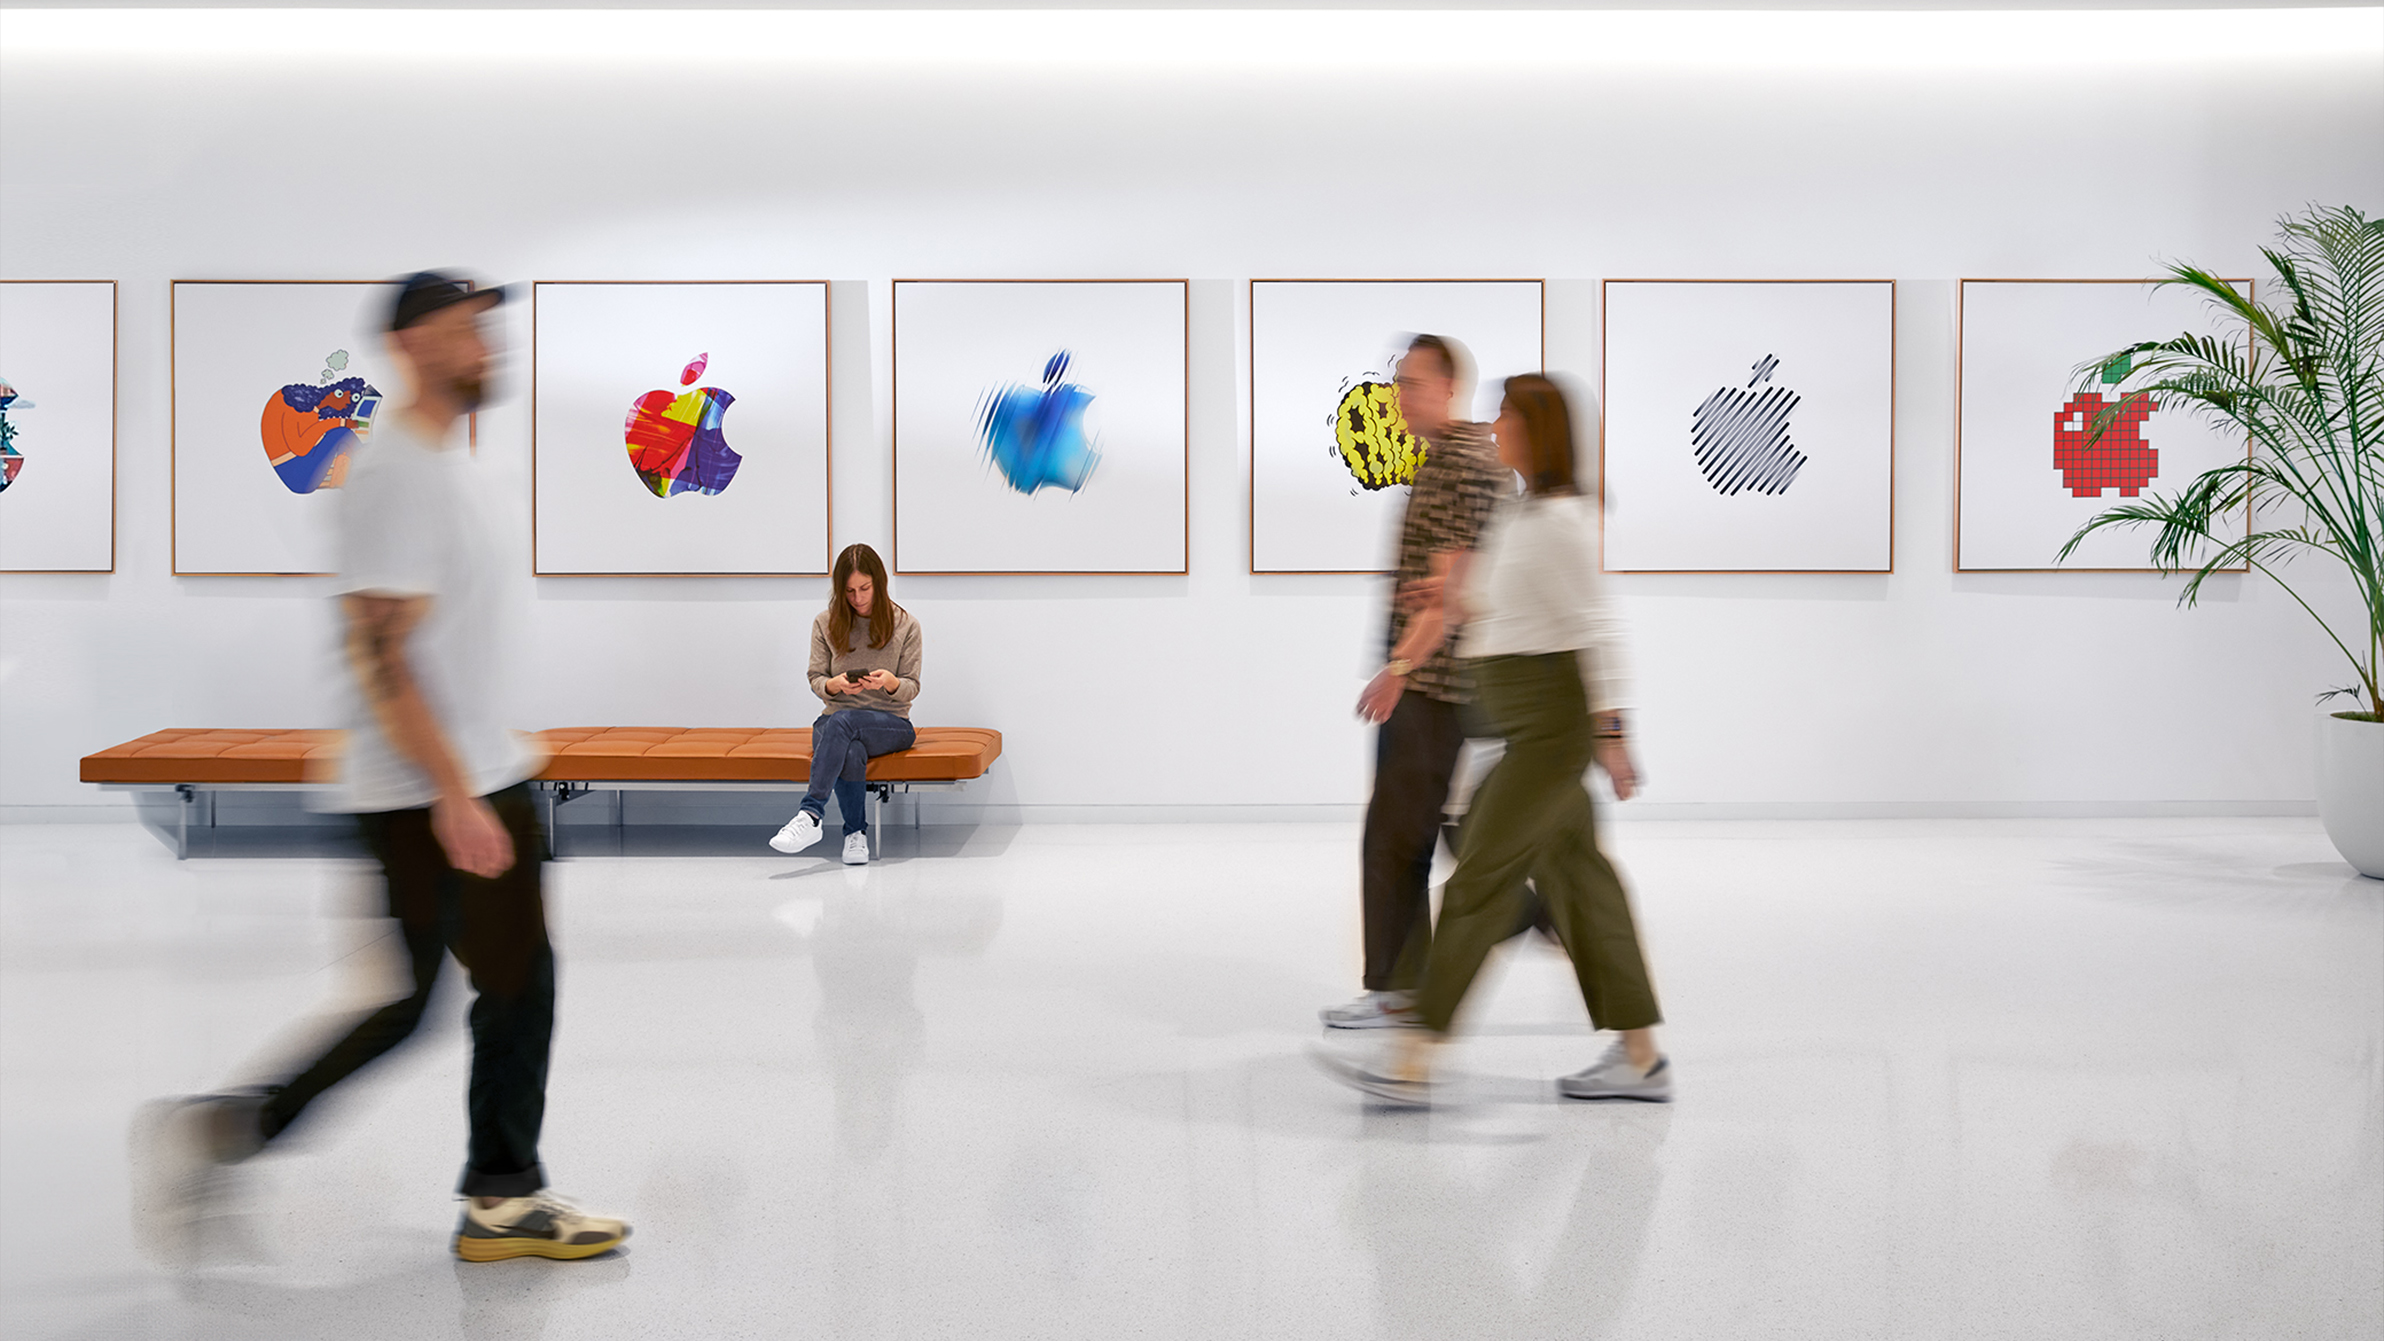 Three Apple colleagues walking past an interior wall with colorful Apple logos, and a fourth employee sitting on a bench.